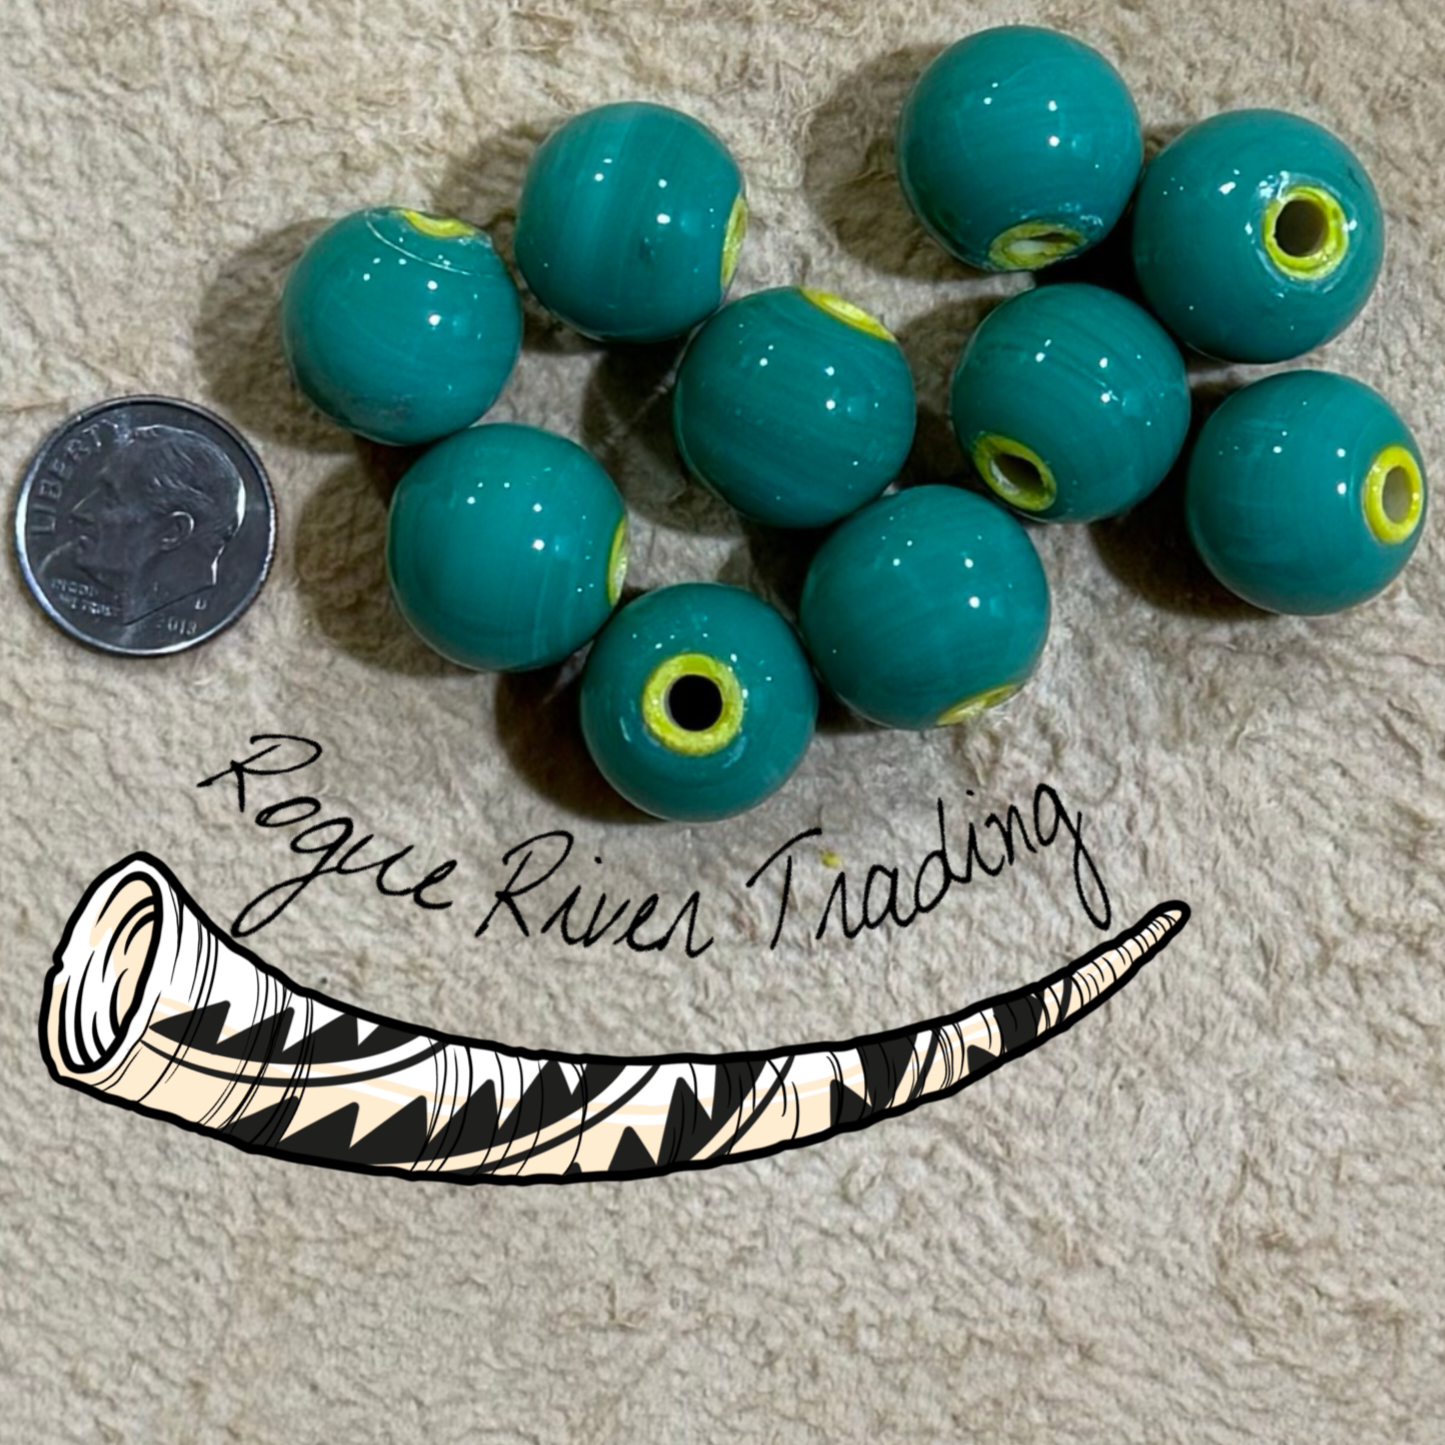 Green with Yellow Core "Hudson Bay" Round 15mm (10 count)